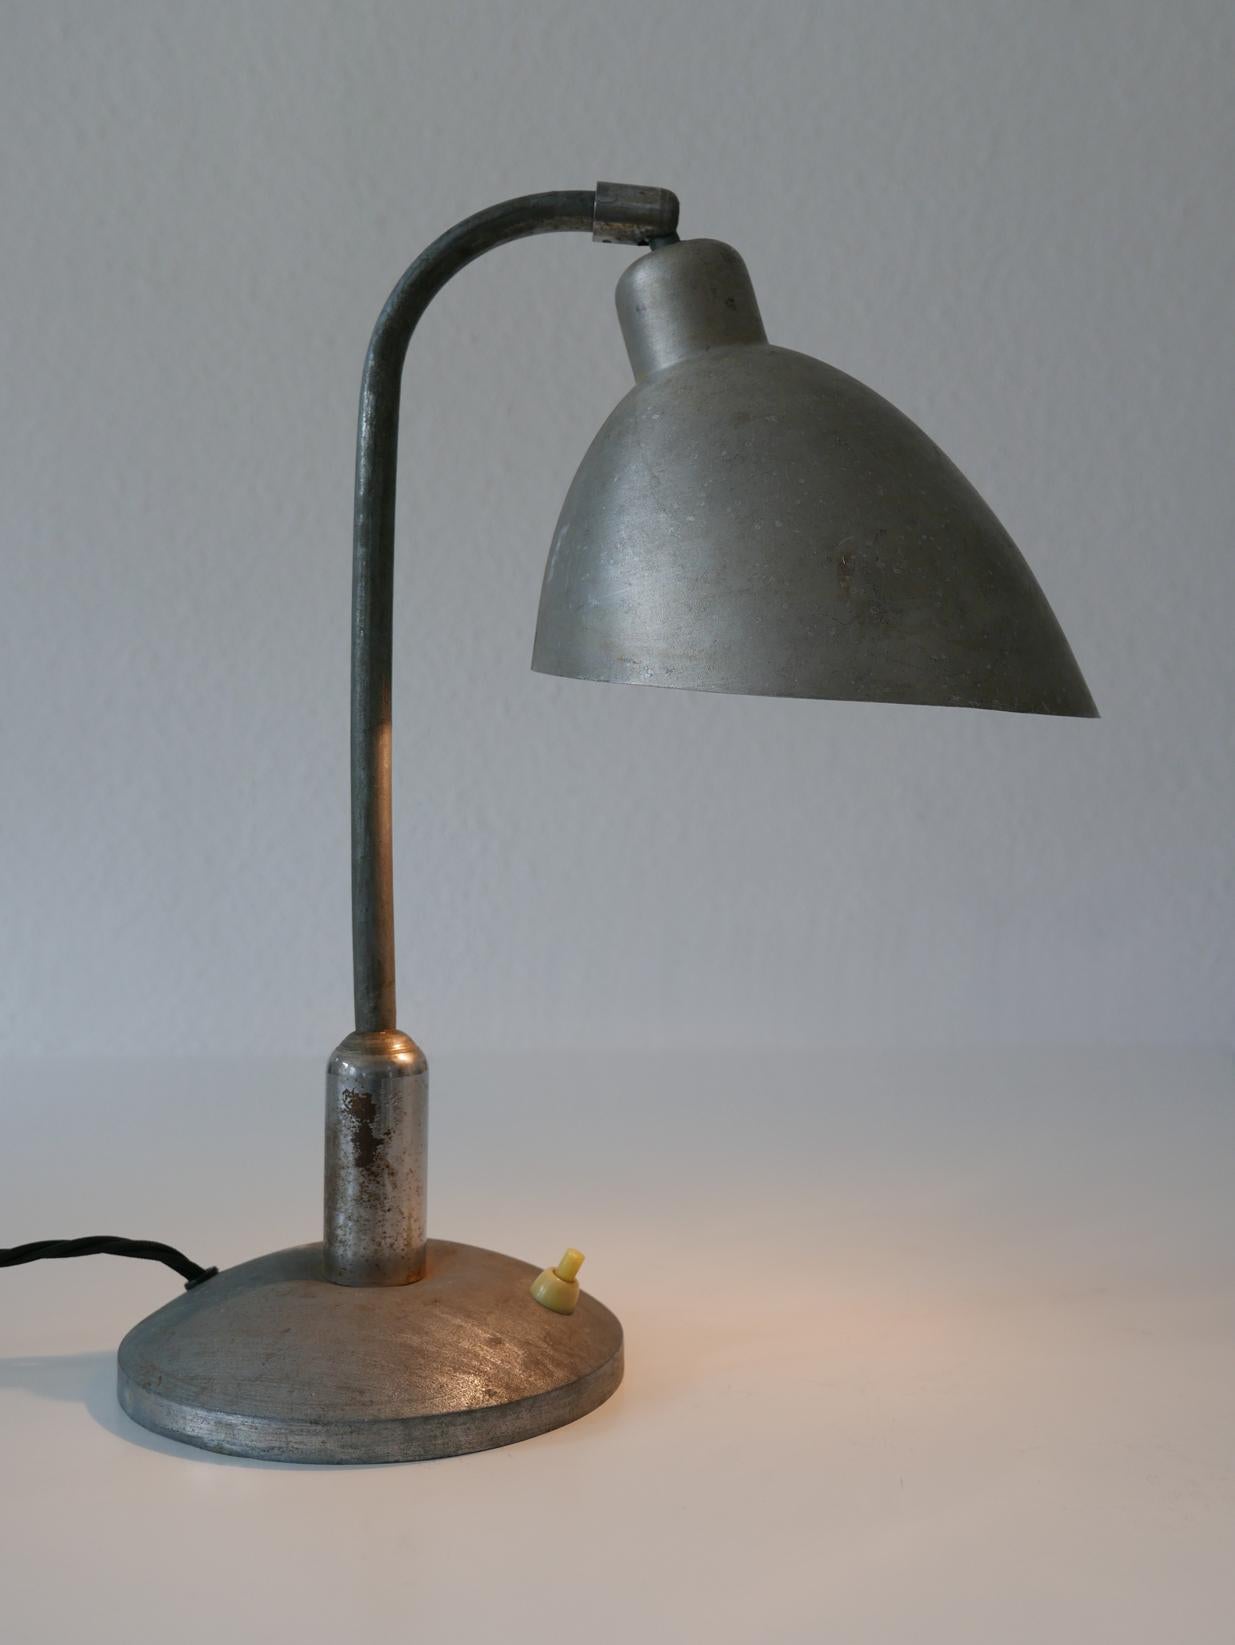 Rare Czech Functionalist or Bauhaus Table Lamp by Franta ‘Frantisek’ Anyz, 1920s For Sale 3